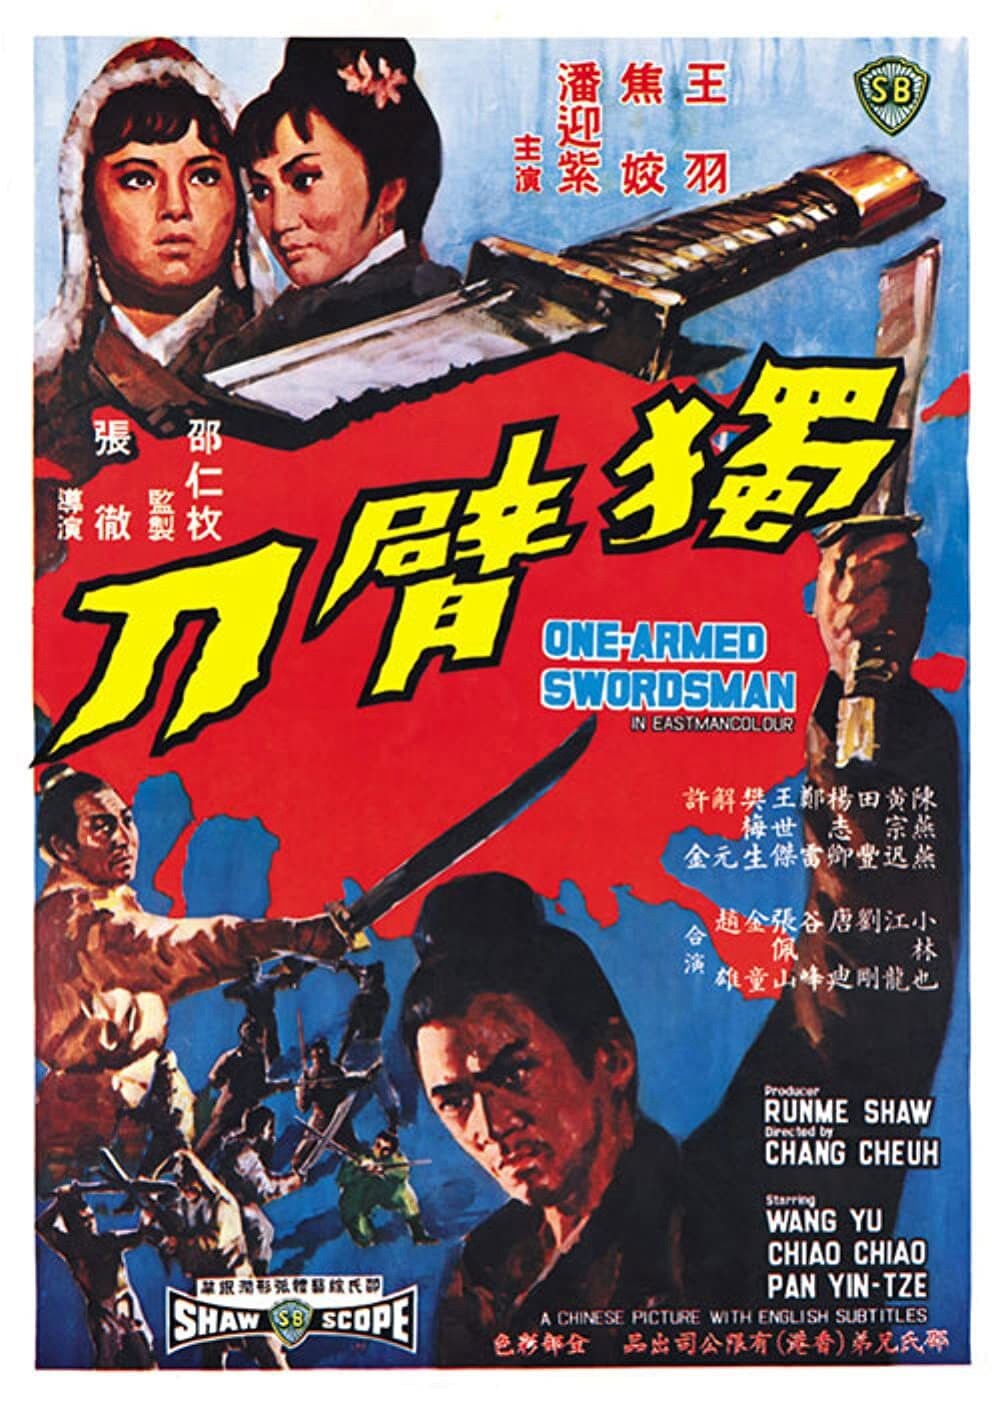 The One-Armed Swordsman 1967